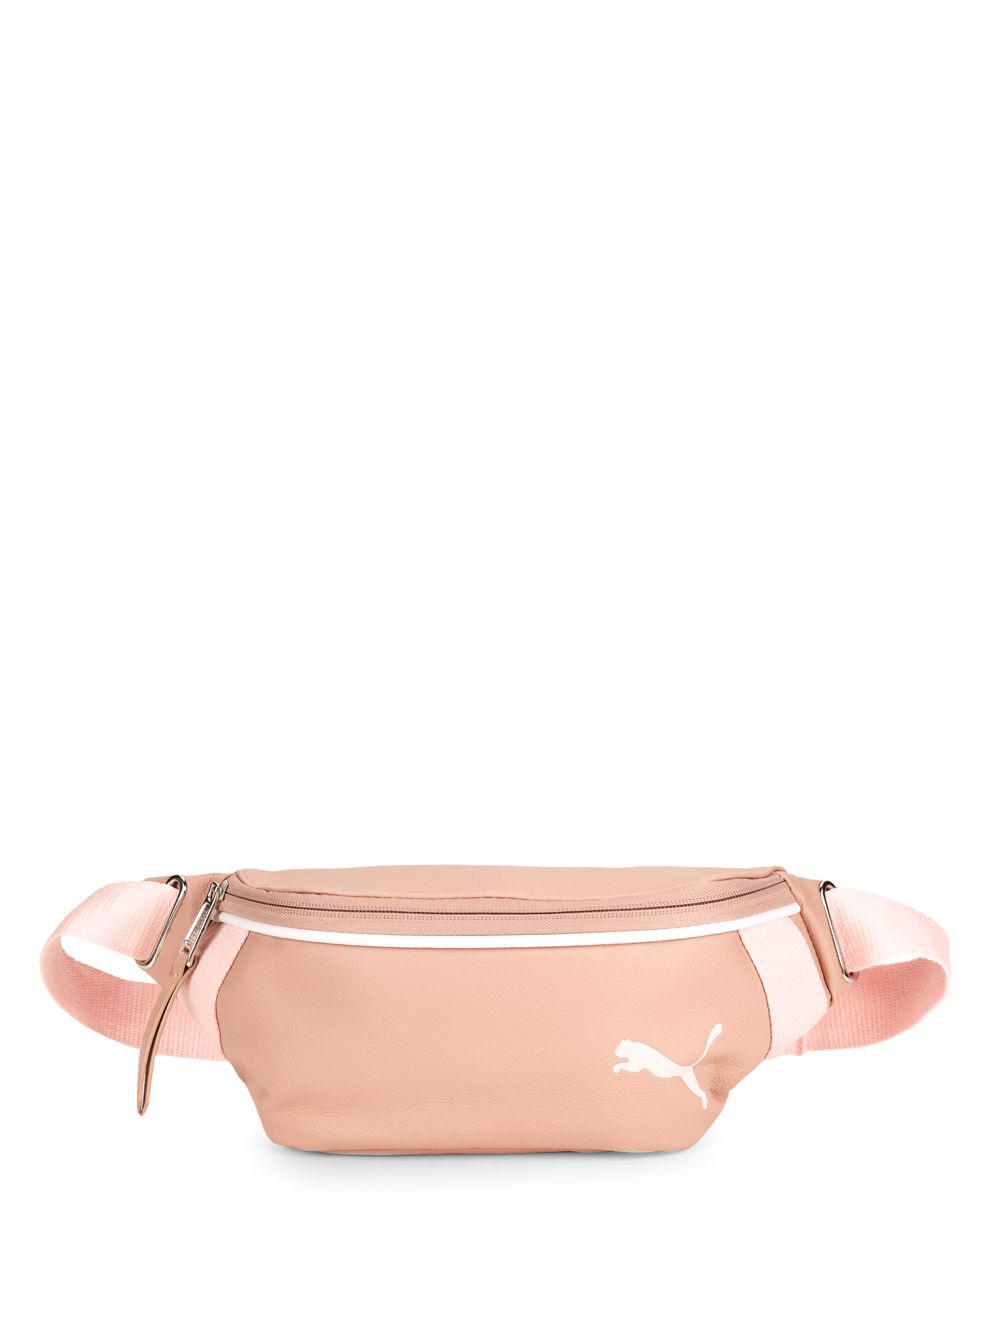 PUMA Evercat Royale Fanny Pack in Pink 